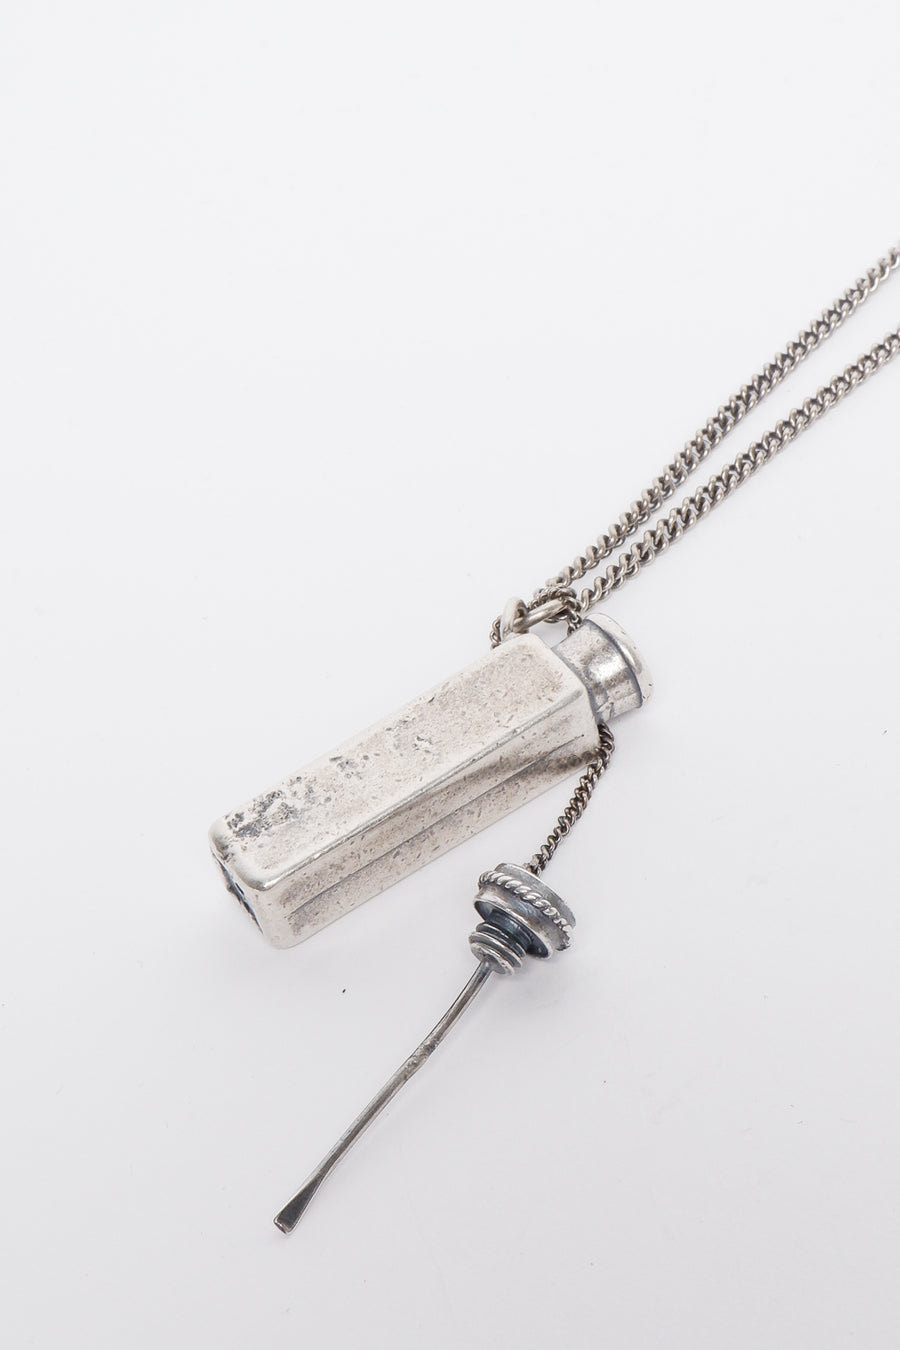 Buy the GOTI CN1122/1 Necklace Silver Chain at Intro. Spend £50 for free UK delivery. Official stockists. We ship worldwide.